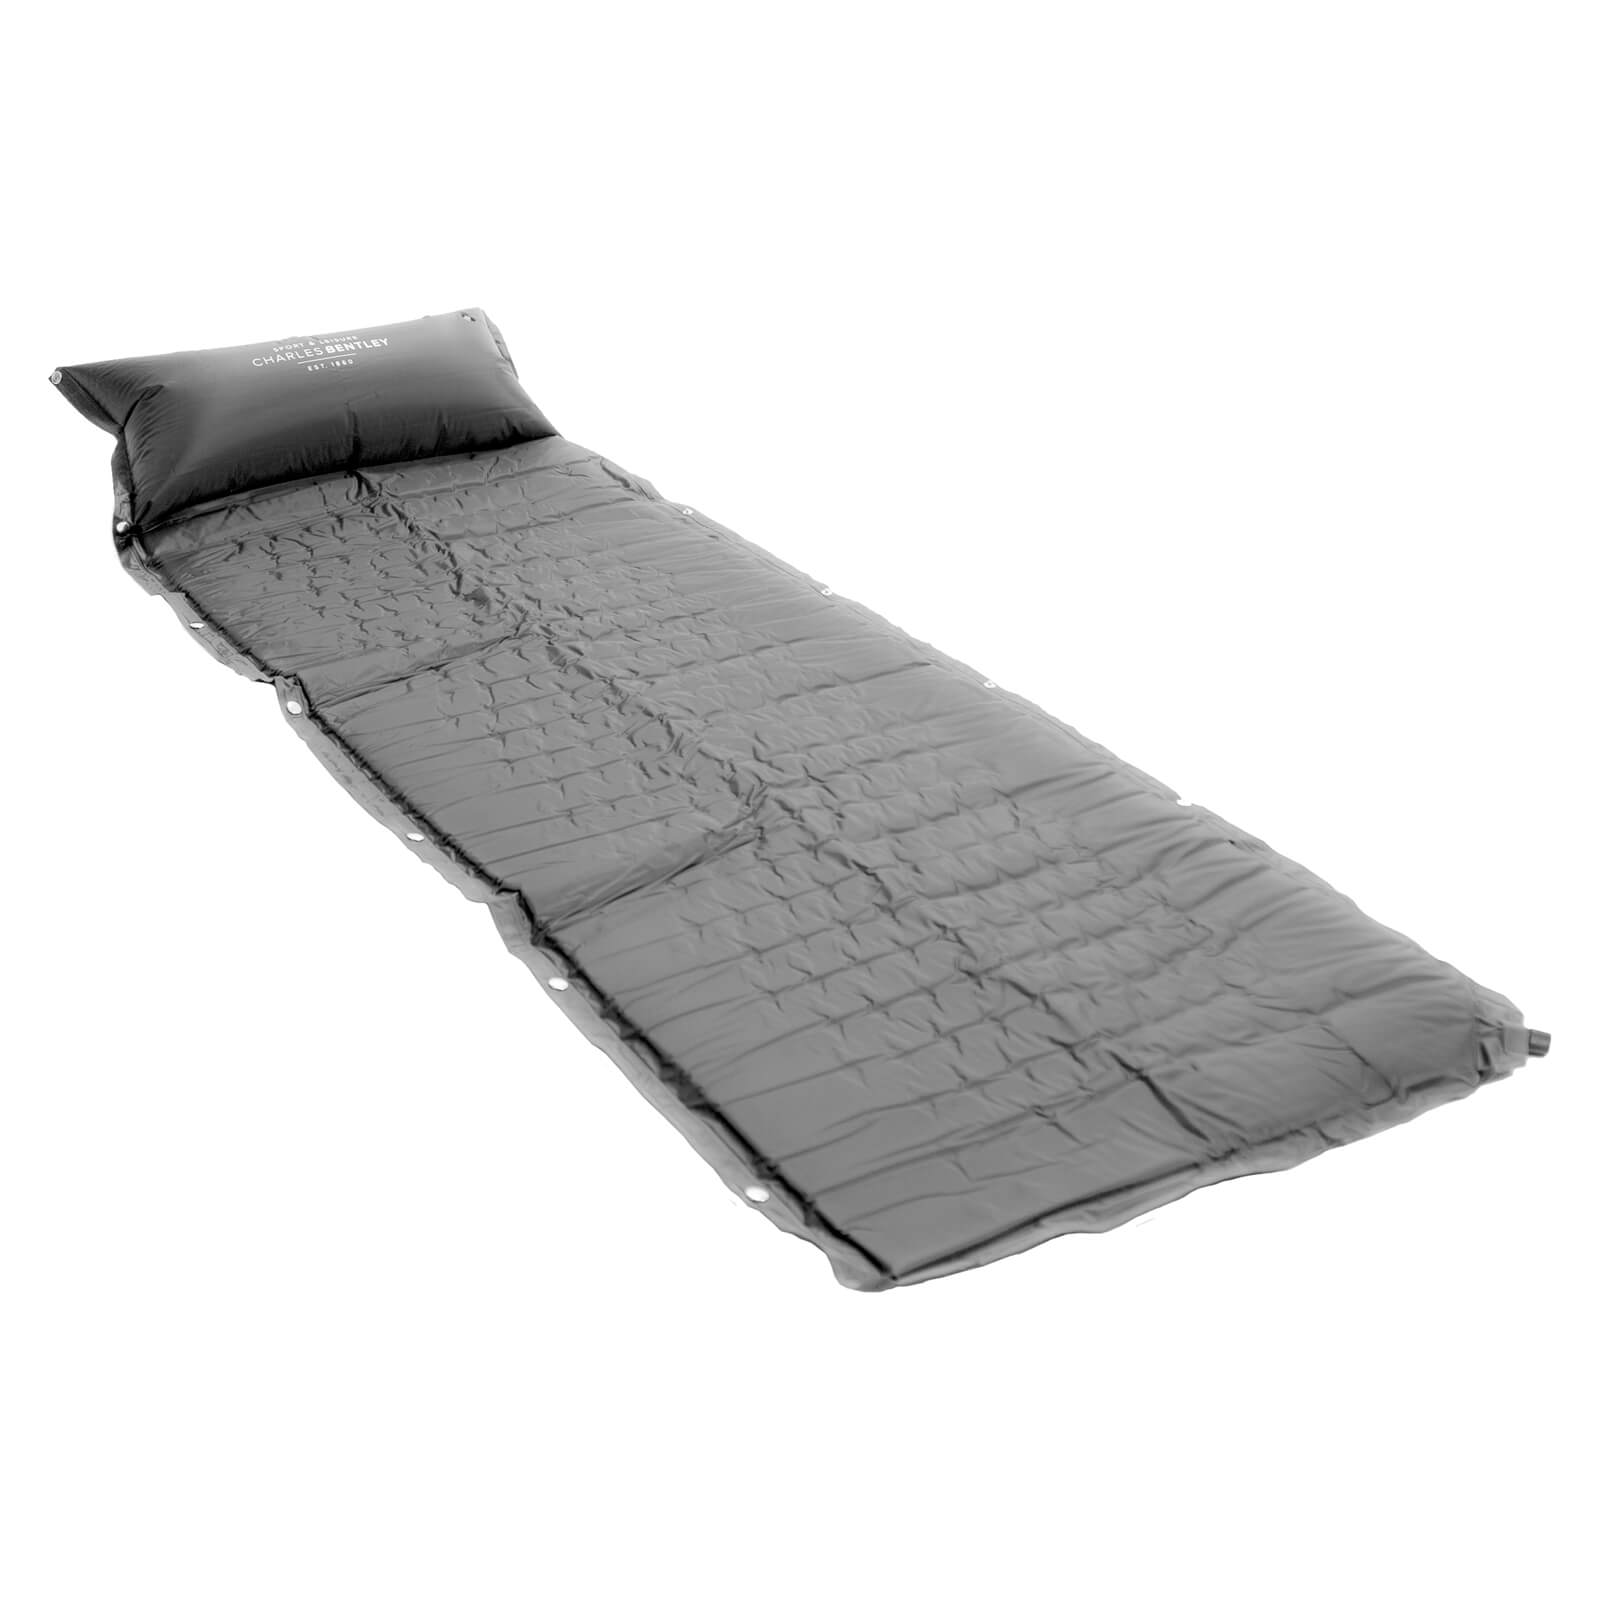 Charles Bentley Self Inflating Single Rollup Camping Mat with Pillow - Grey